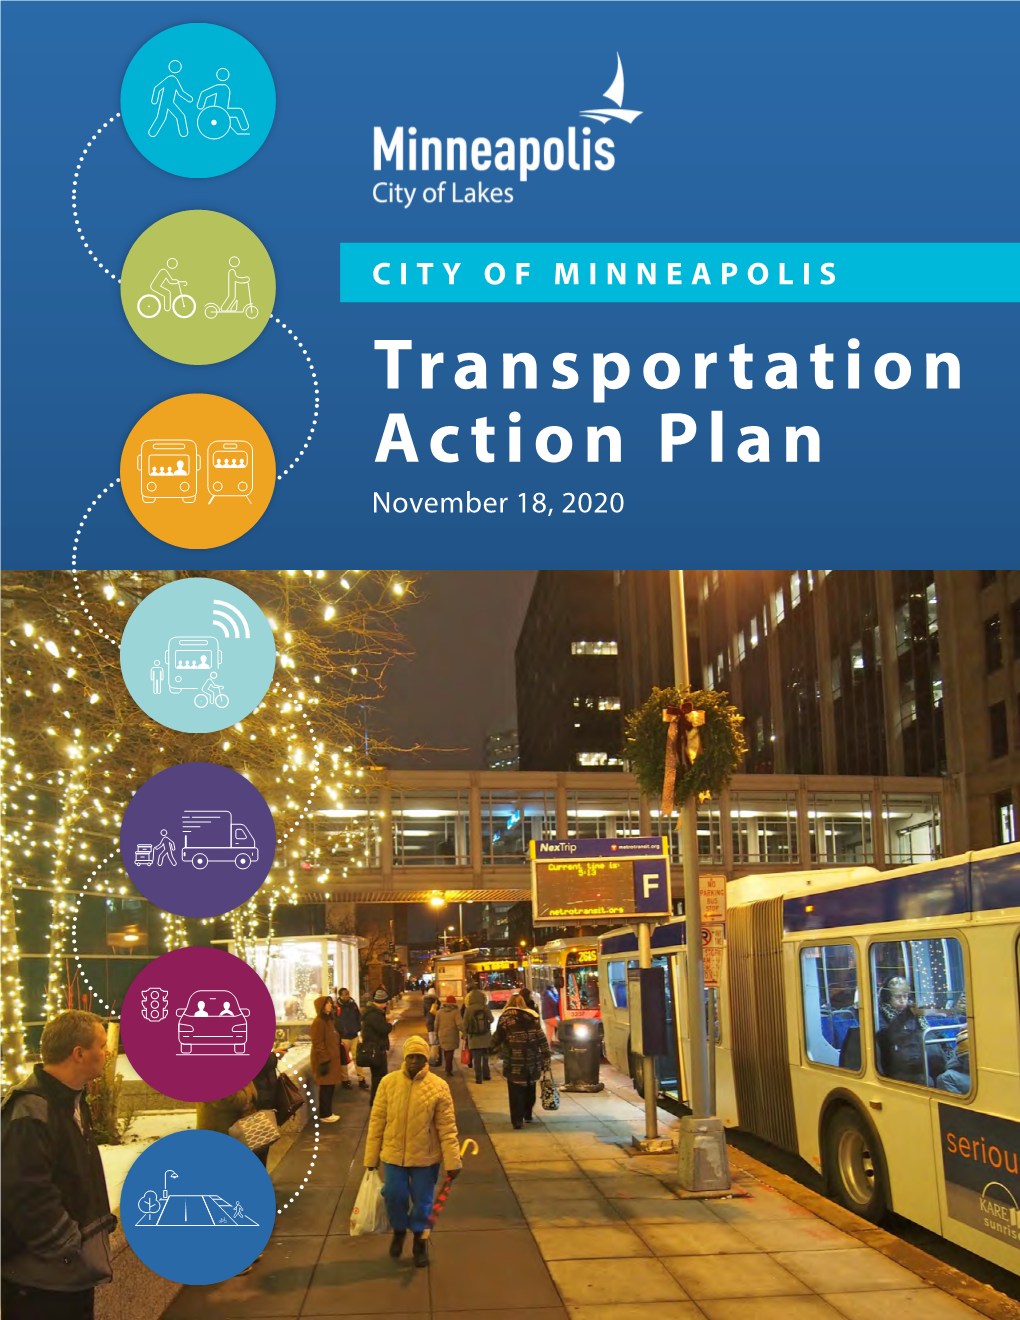 CITY of MINNEAPOLIS Transportation Action Plan November 18, 2020 Our Transportation System Is the Backbone of Our City